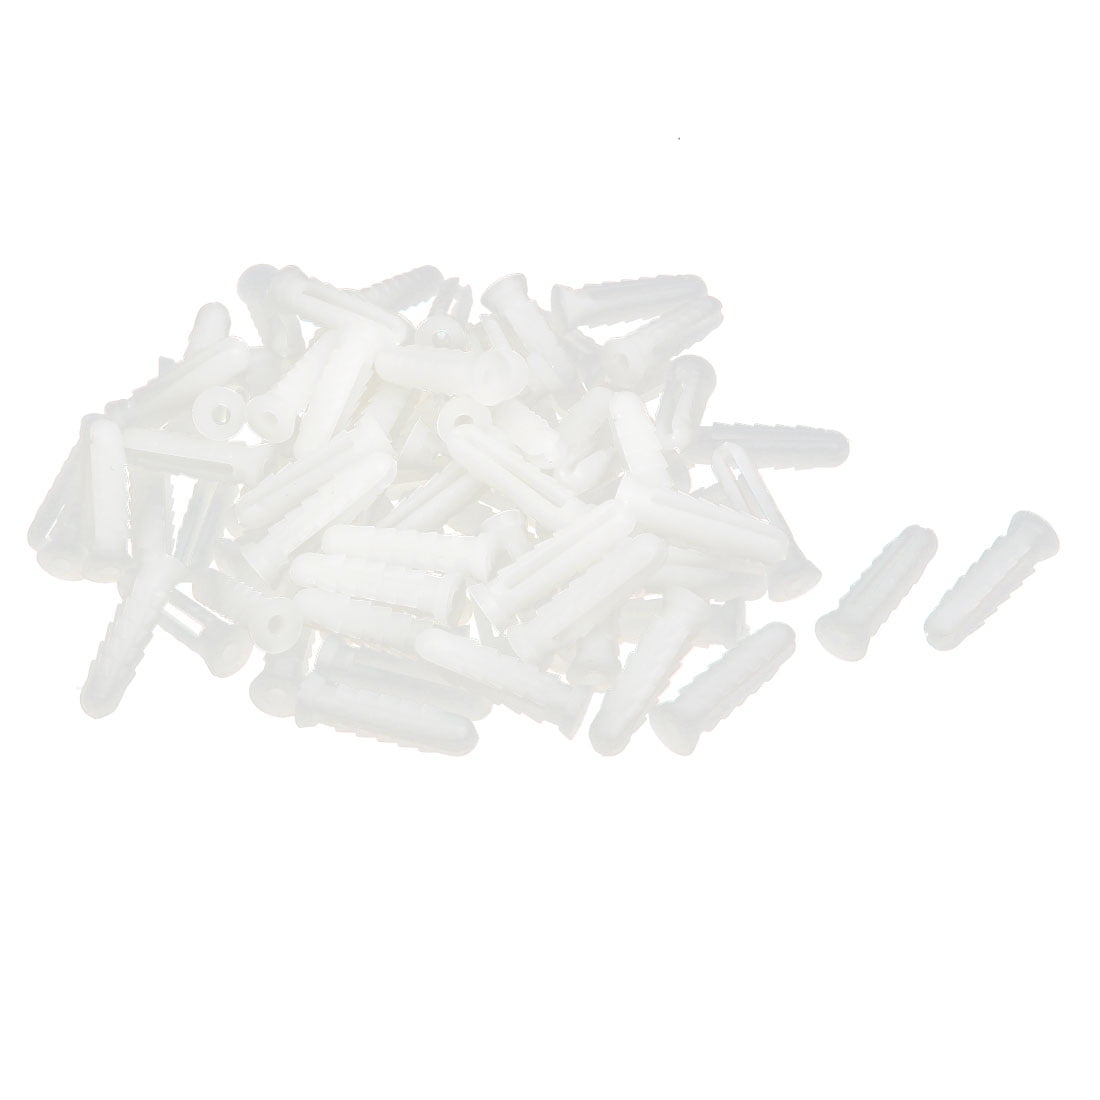 25mm Length Plastic Expansion Bolt Wall Drywall Anchor White 80pcs ...